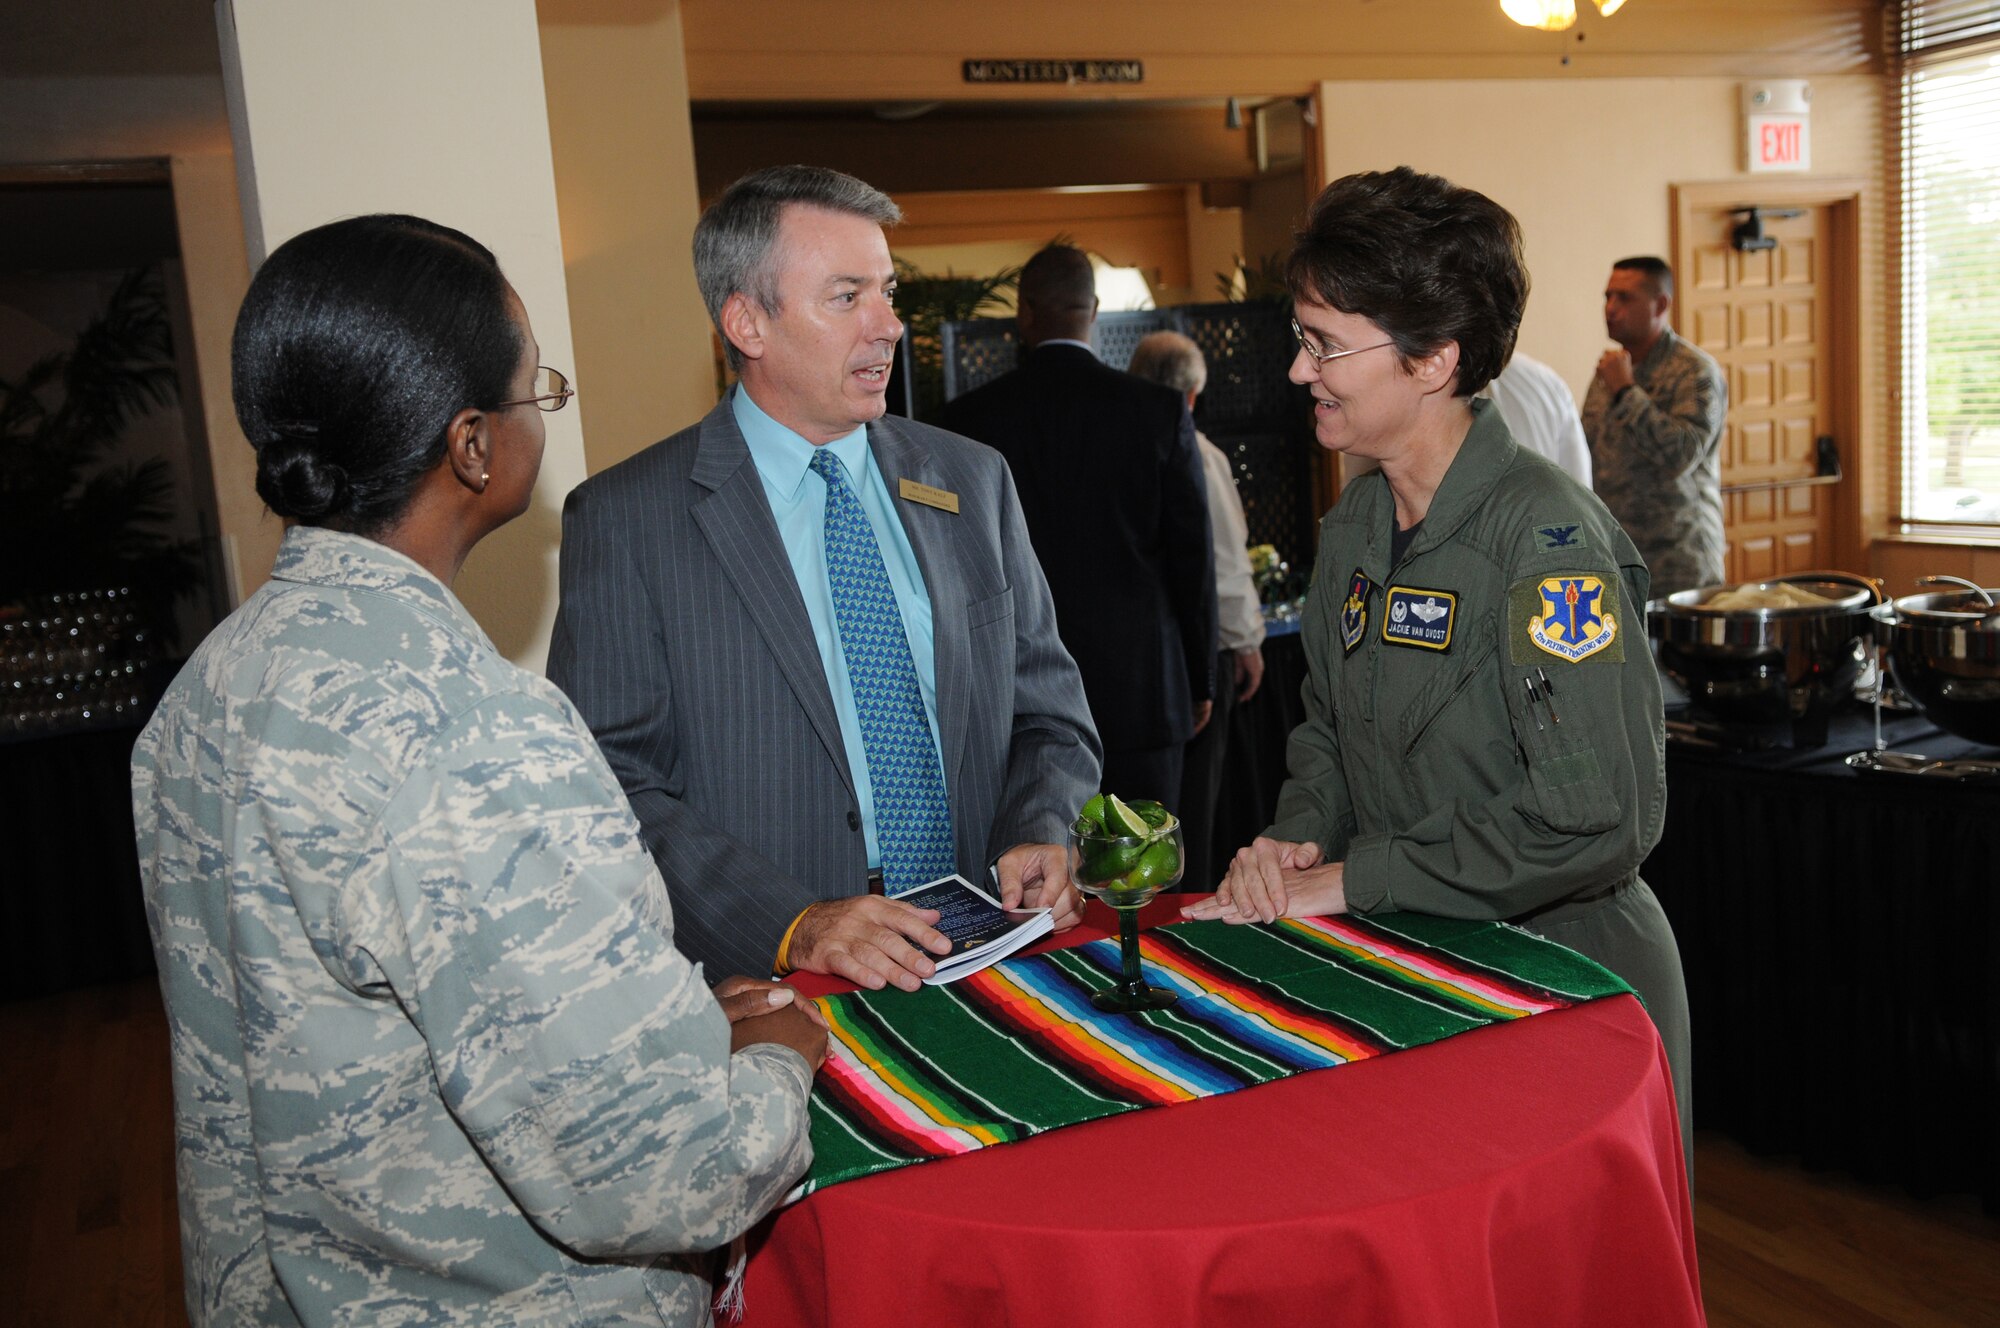 Col. Jacqueline Van Ovost (right), 12th Flying Training Wing commander,and Col. Soledad Lindo-Moon (left), 12th Medical Group commander,  speak with one of the newest Randolph Honorary Commanders,  Tony Ralf during the Honorary Commander's reception Sept. 10. (U.S. Air Force photo/Melissa Peterson)
               